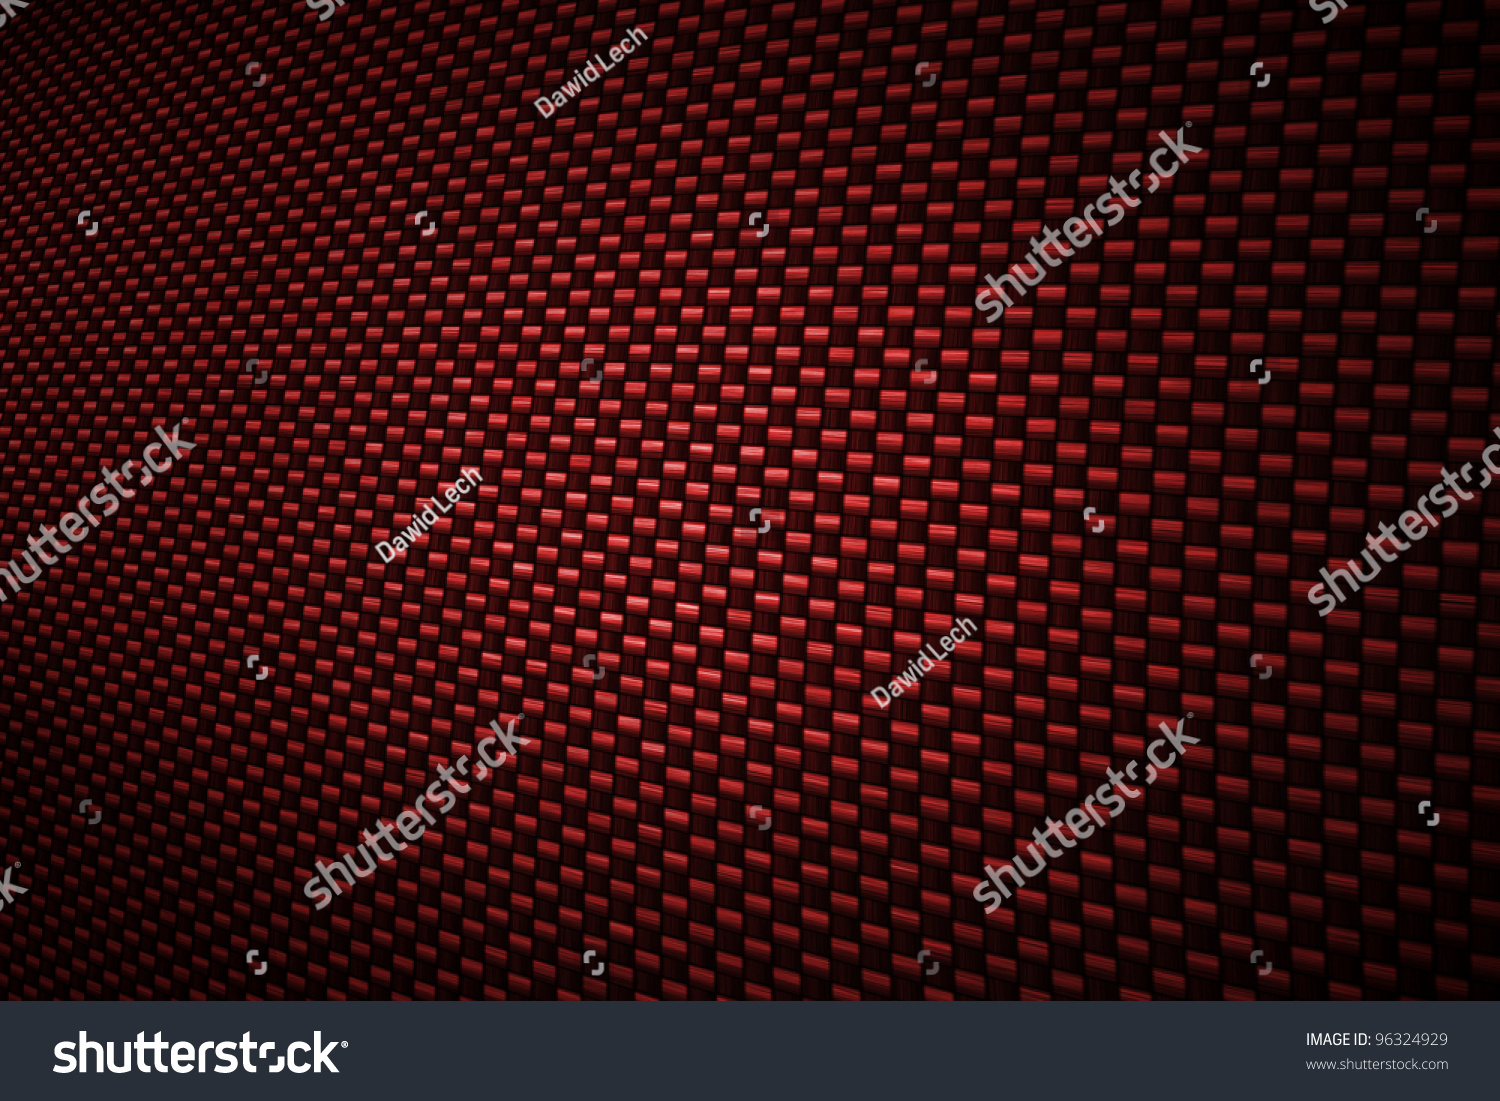 Red Carbon Fiber Background Stock Photo 96324929 : Shutterstock